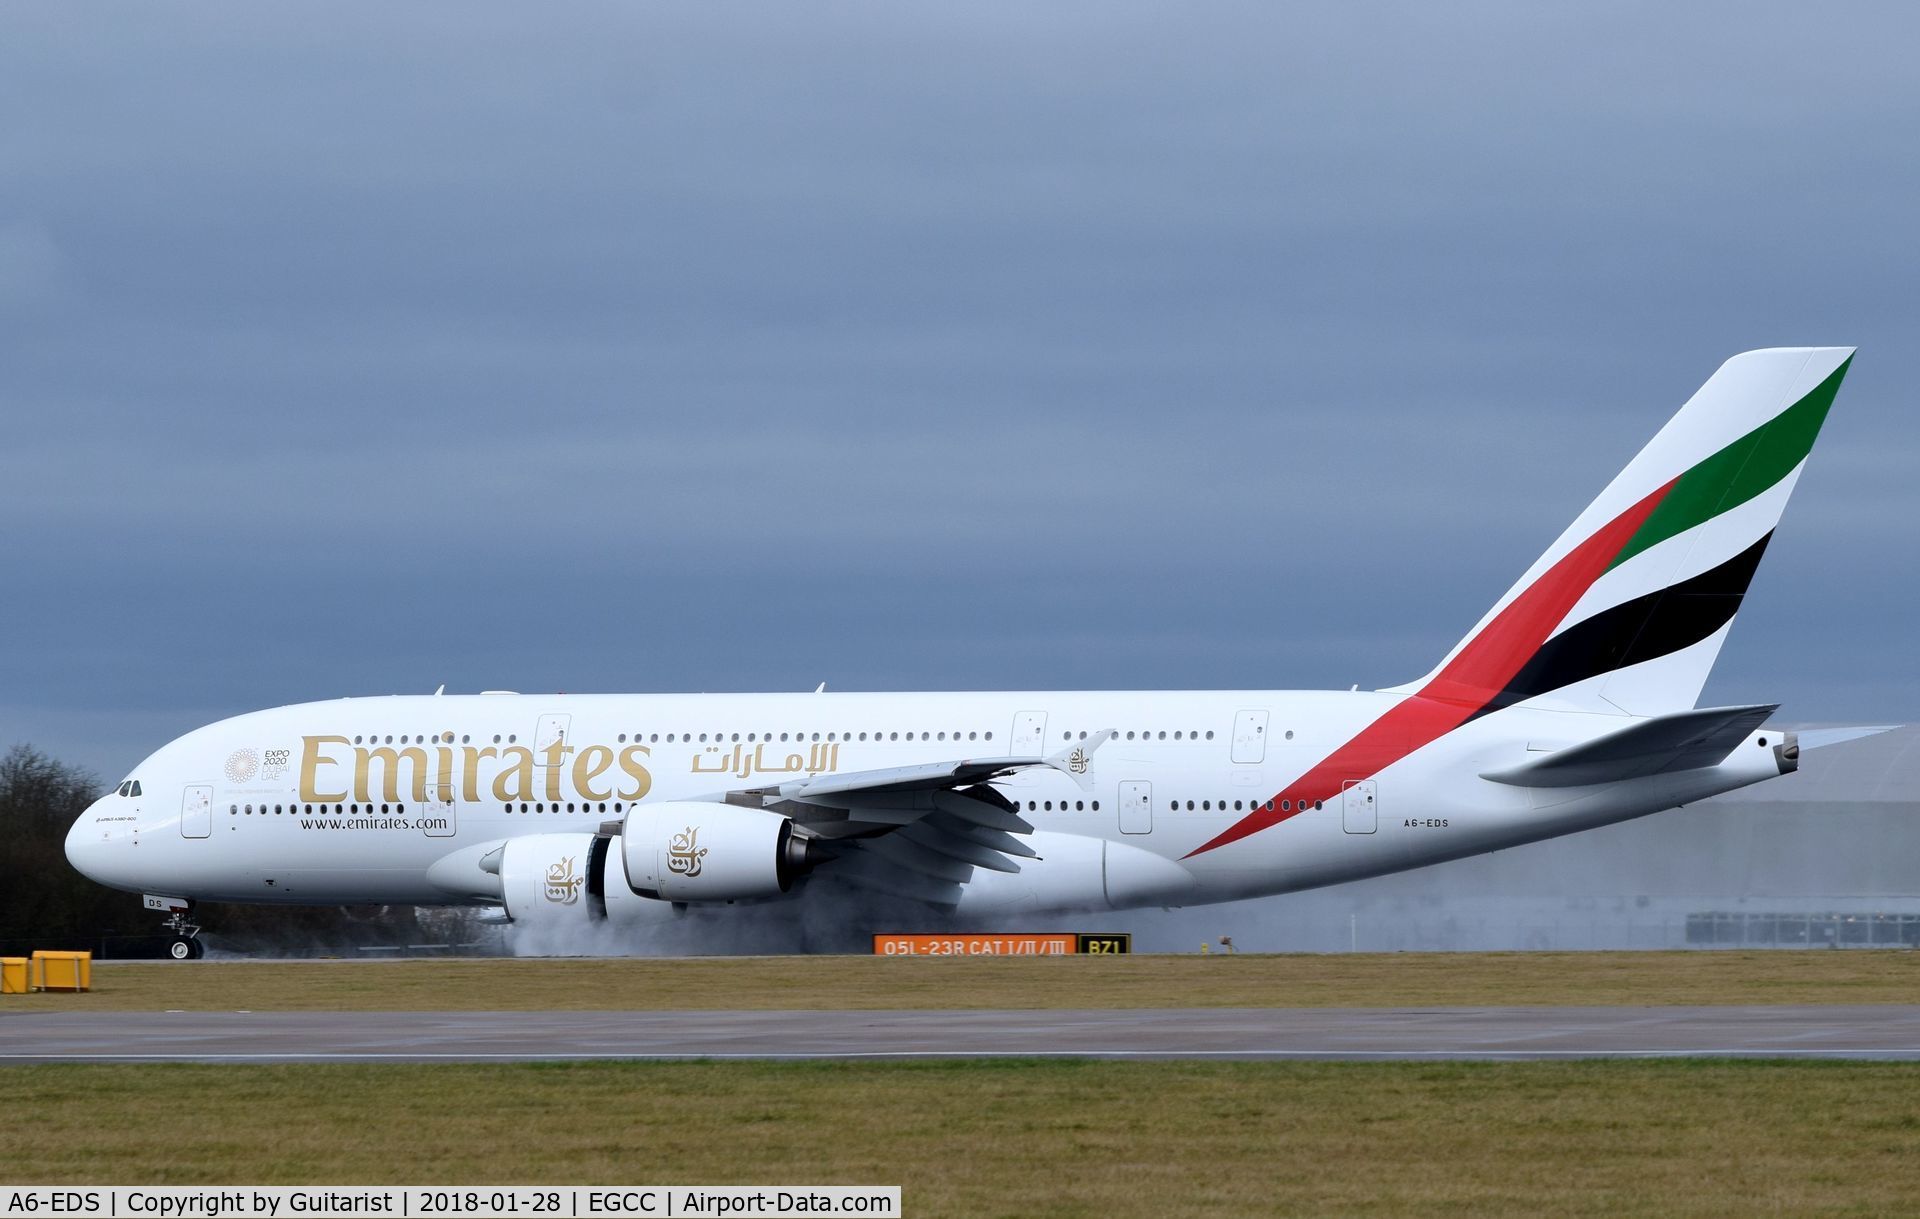 A6-EDS, 2011 Airbus A380-861 C/N 086, At Manchester